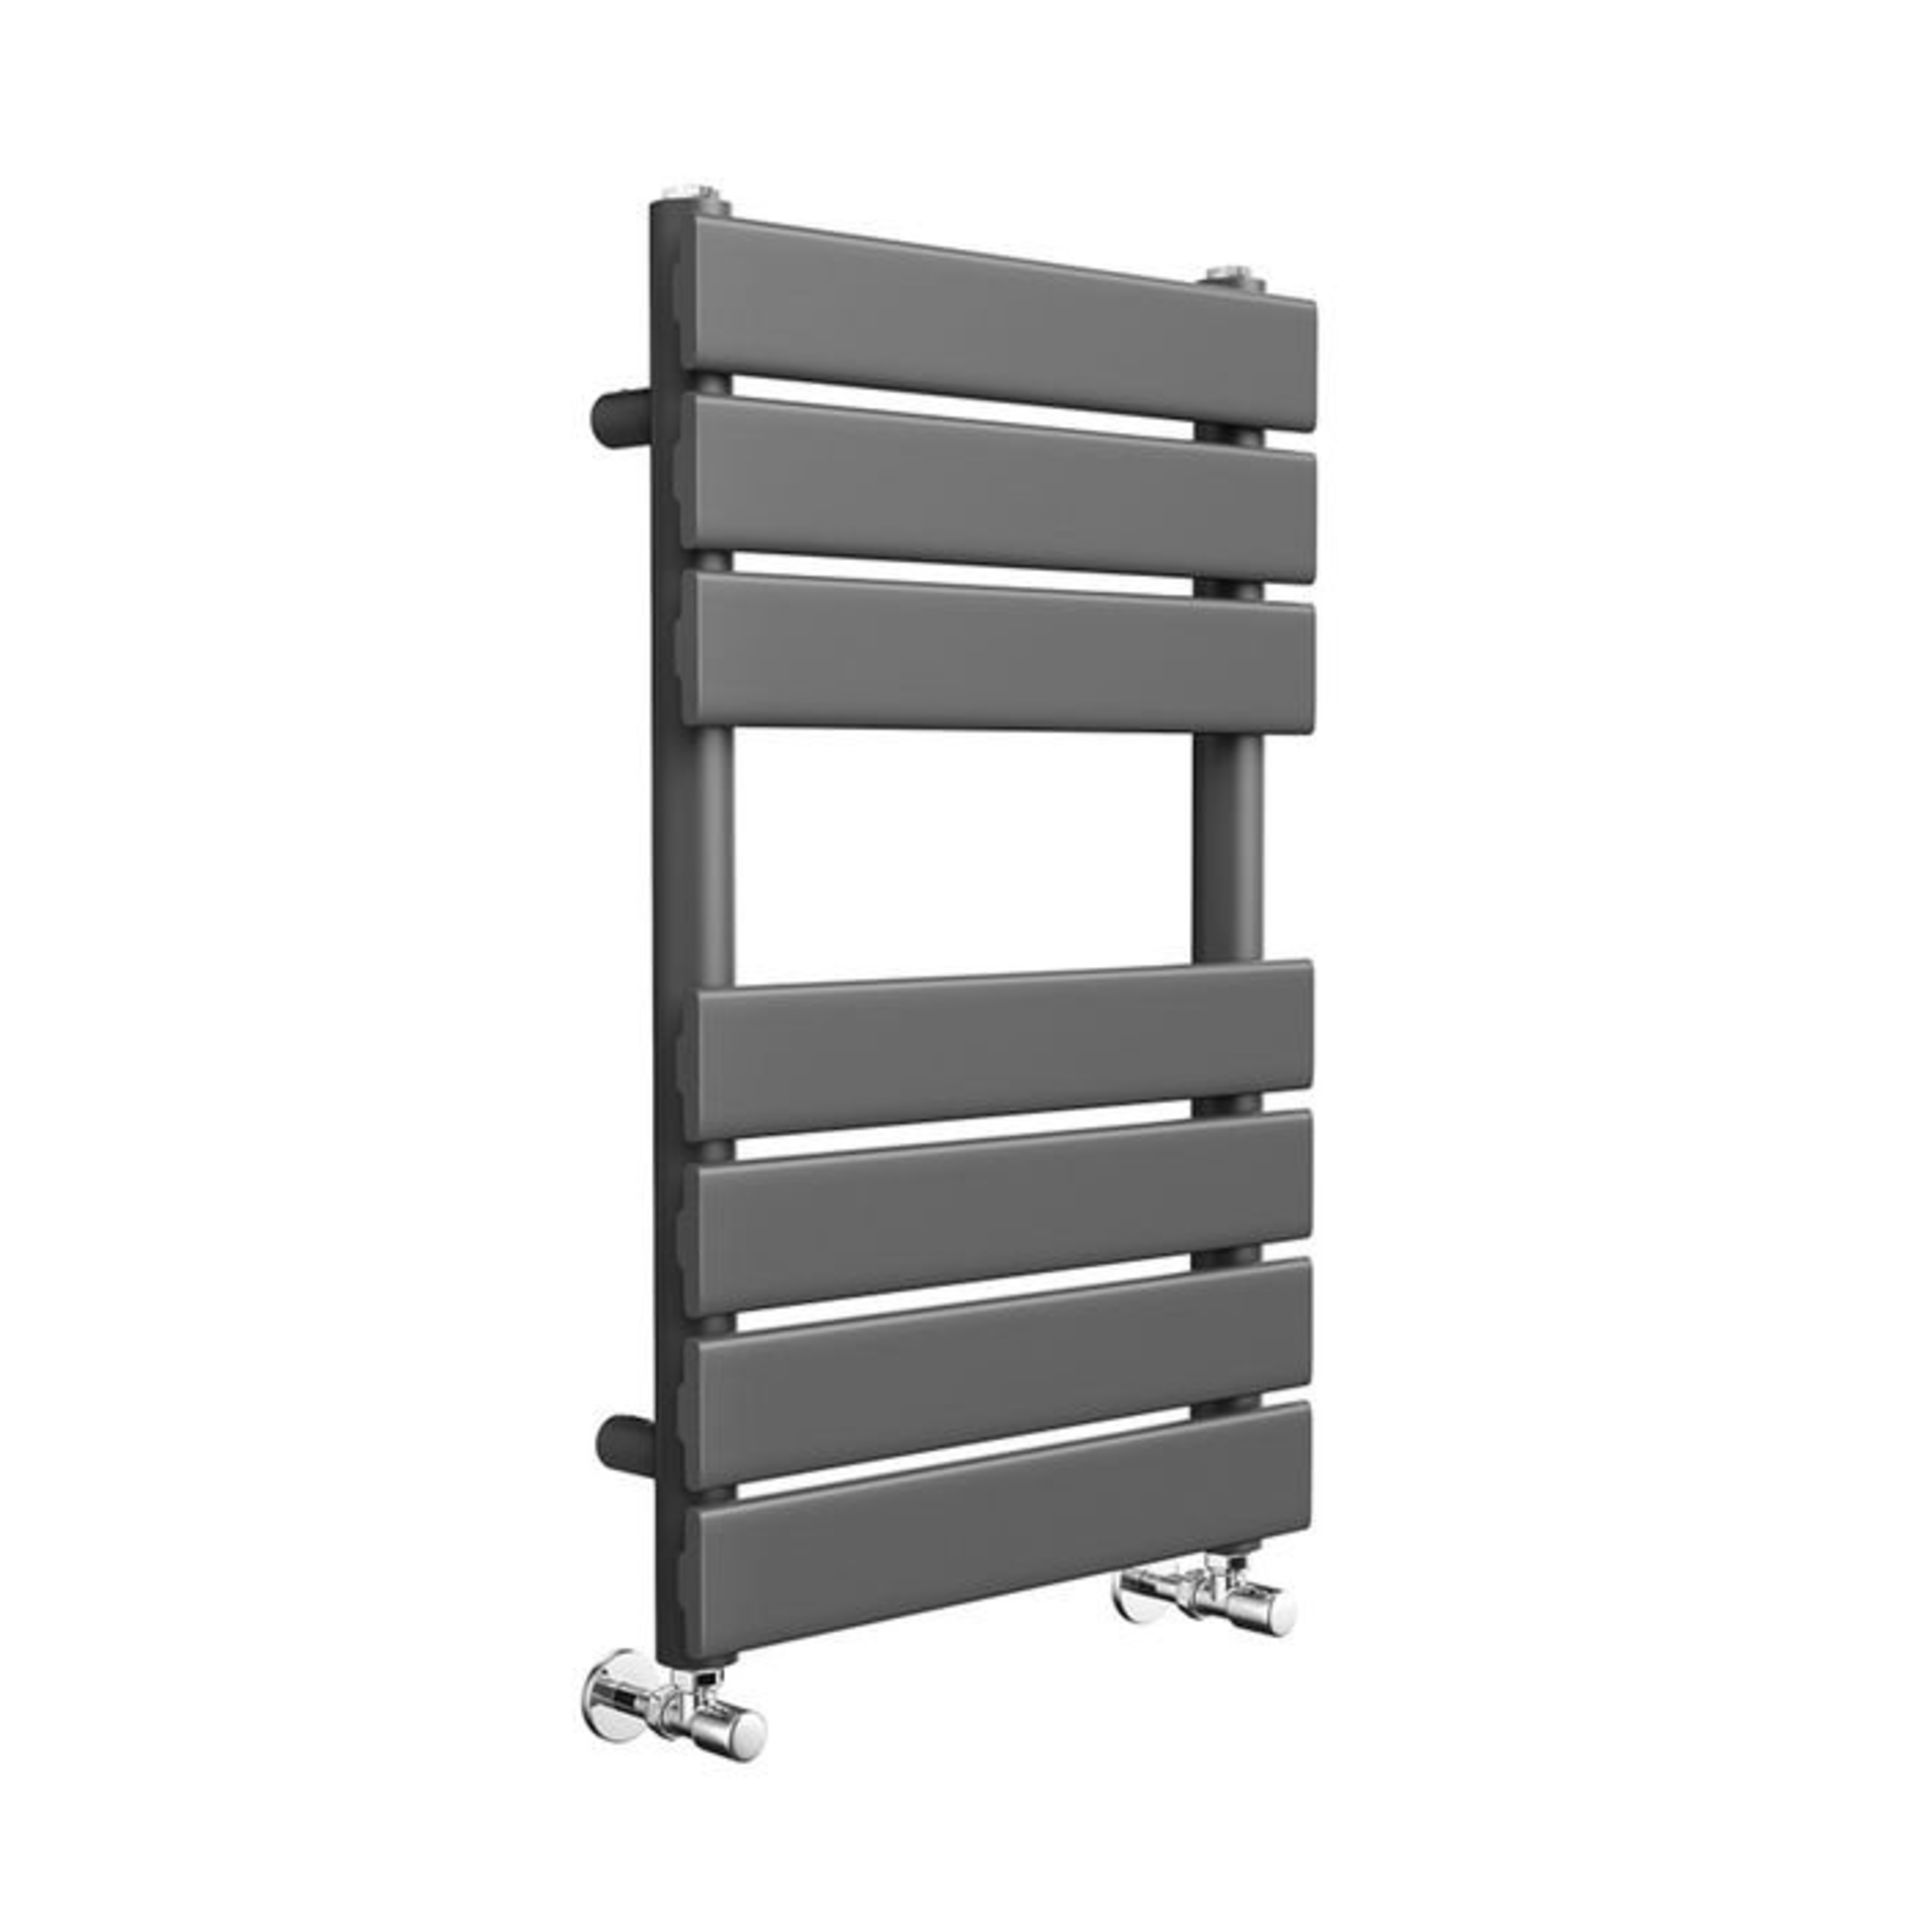 (H48) 650x400mm Anthracite Flat Panel Ladder Towel Radiator RRP £174.99 Made with low carbon steel - Image 3 of 3